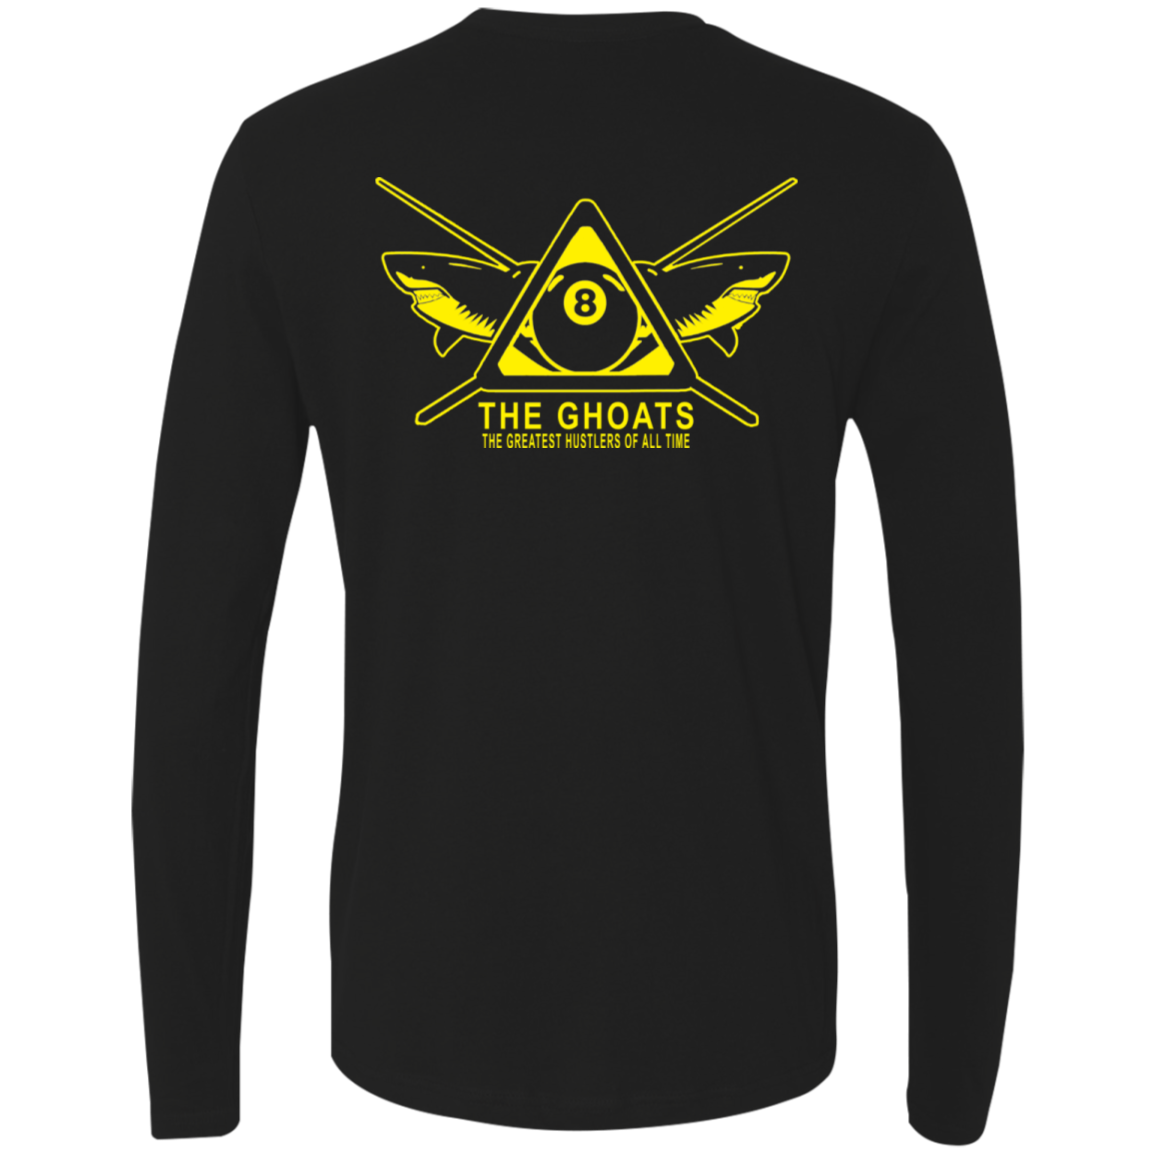 The GHOATS Custom Design #35. Beware of Sharks. Shoot at Your Own Risk. Ultra Soft Fitted Men's Long Sleeve